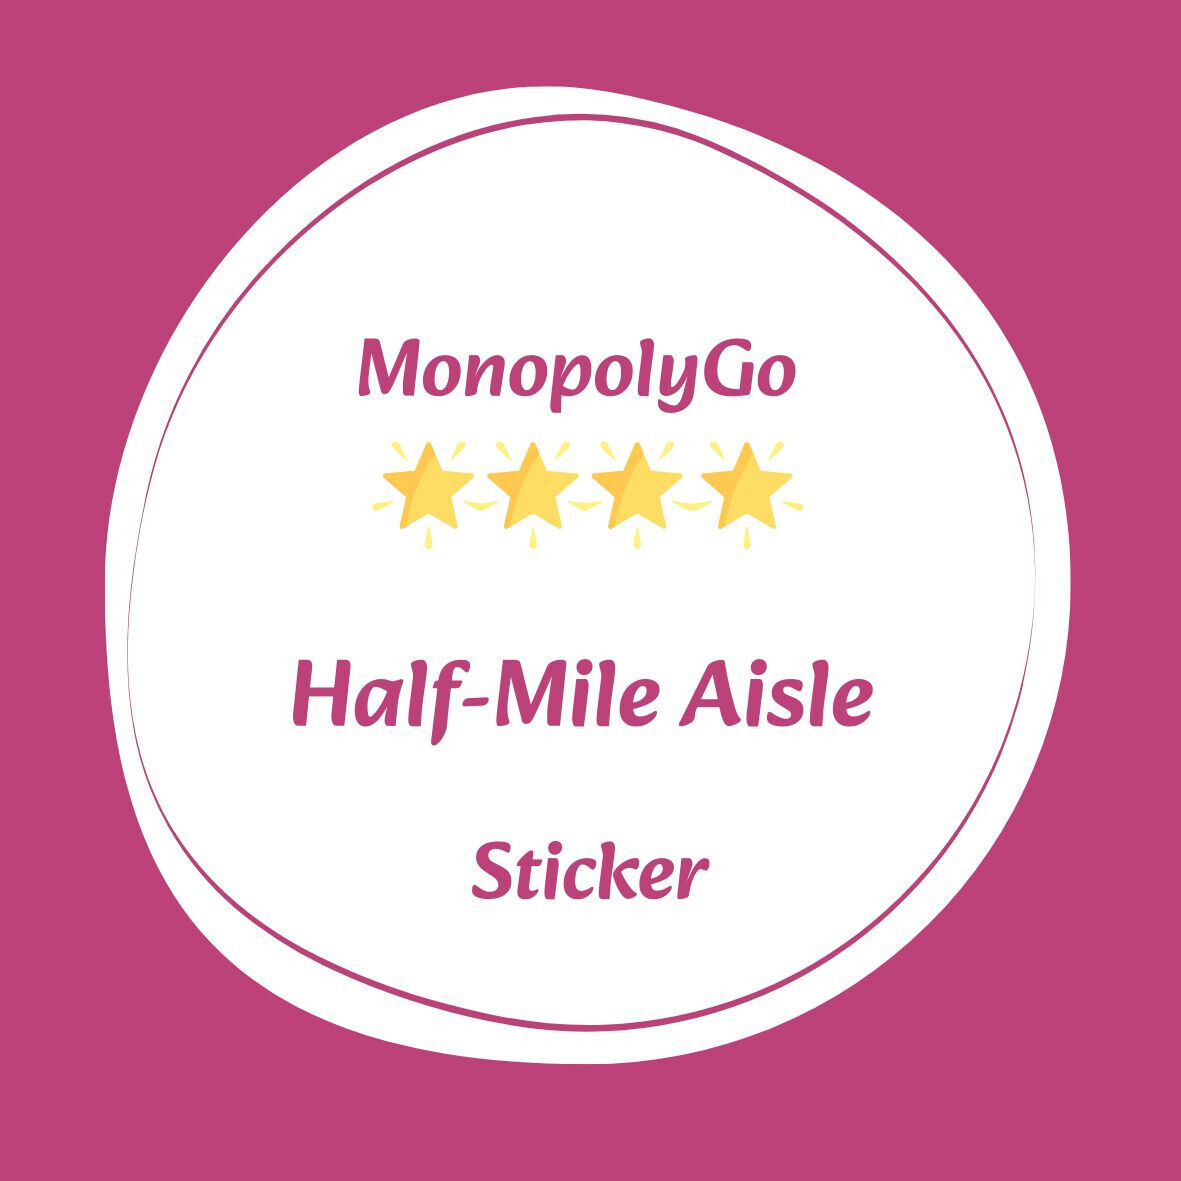 Half-Mile Aisle Monopoly GO 4 Star ⭐️⭐️⭐️⭐️ Stickers -⚡️Cheap Fast DELIVERY⚡️